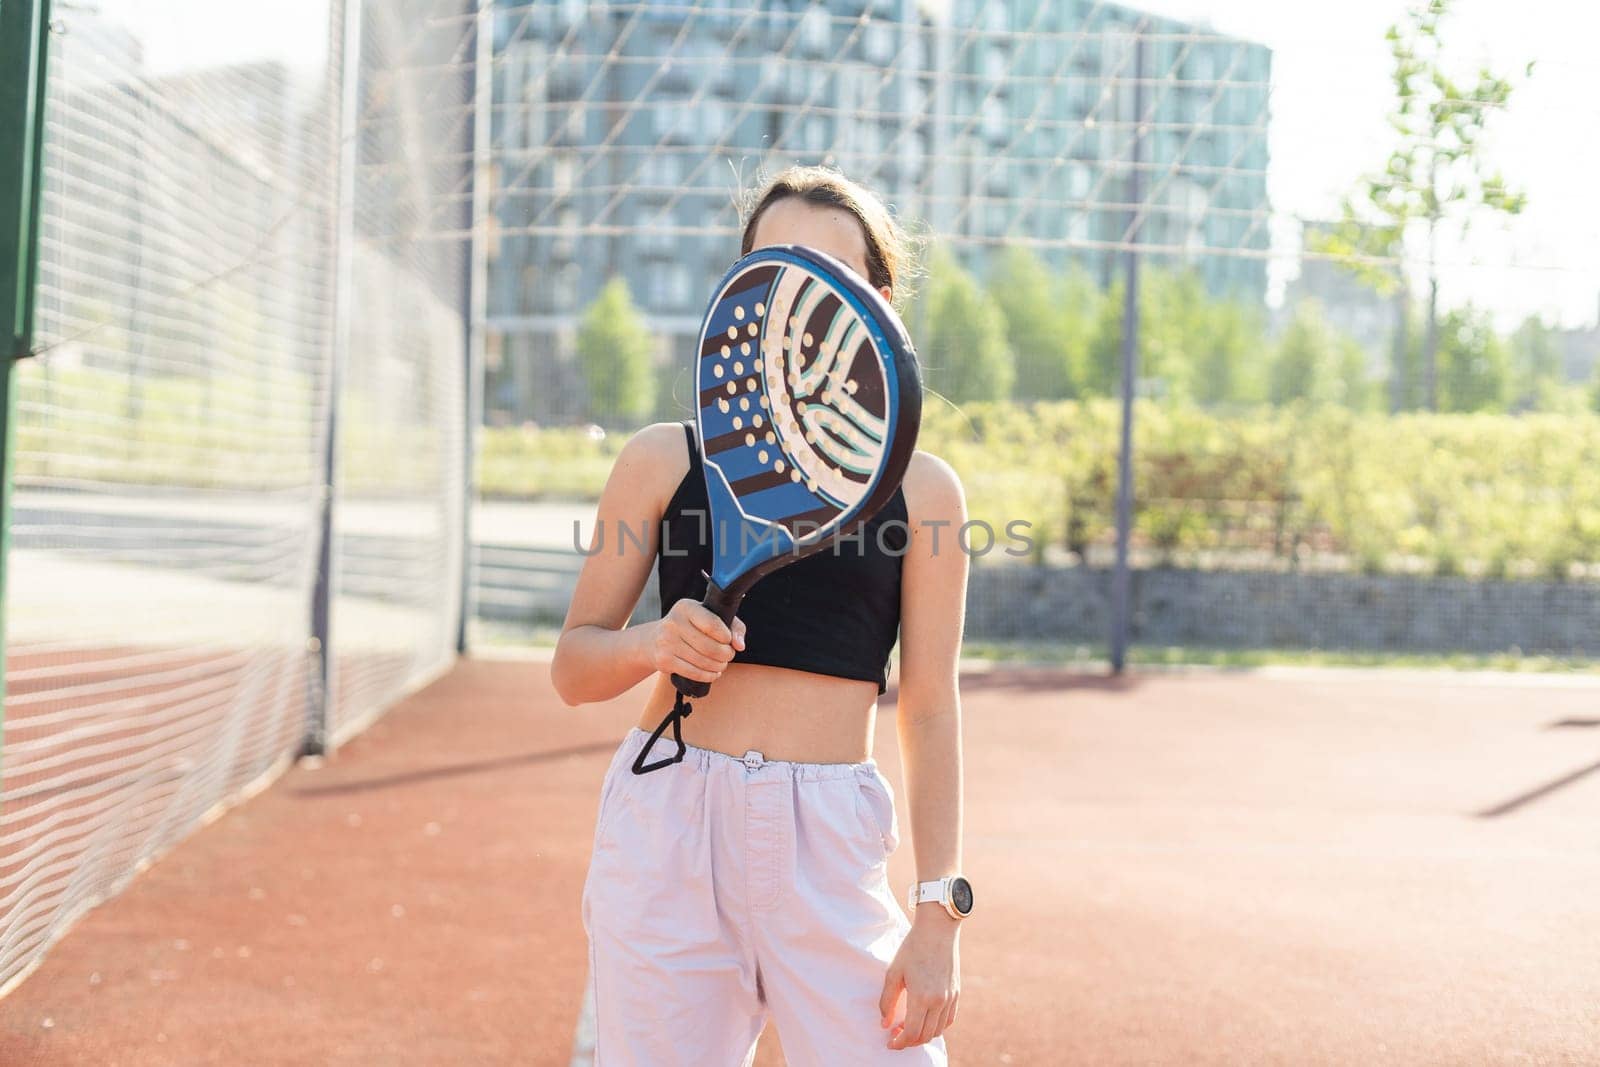 Padel tennis player with racket and ball in hands. Girl athlete with paddle racket on court outdoors. Sport concept. Download a high quality photo for the design of a sports app or web site. High quality photo